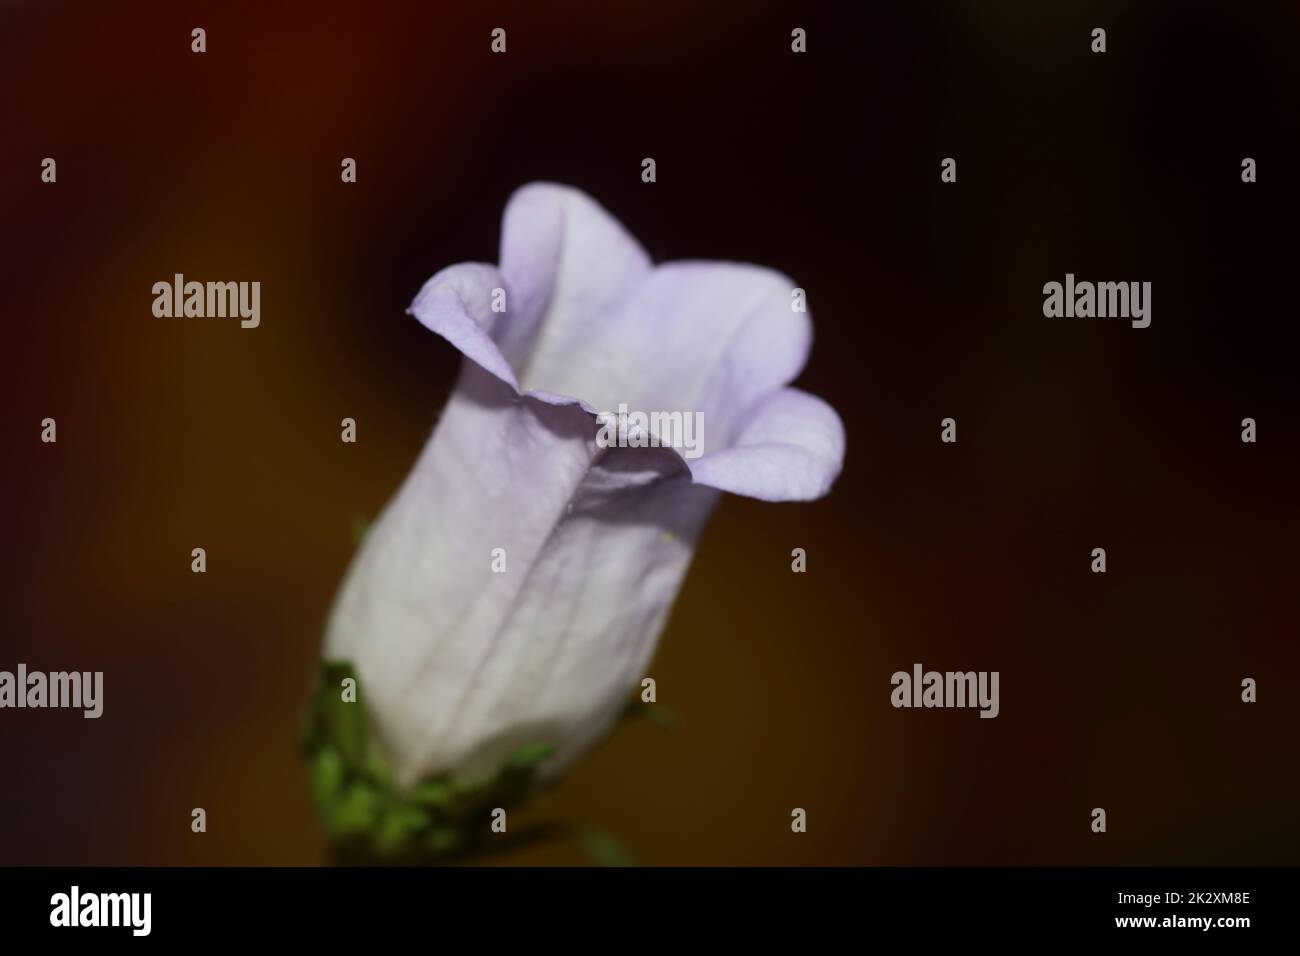 Flower blossom close up Campanula medium family campanulaceae high quality big size prints shop wall posters home decor natural plants Stock Photo